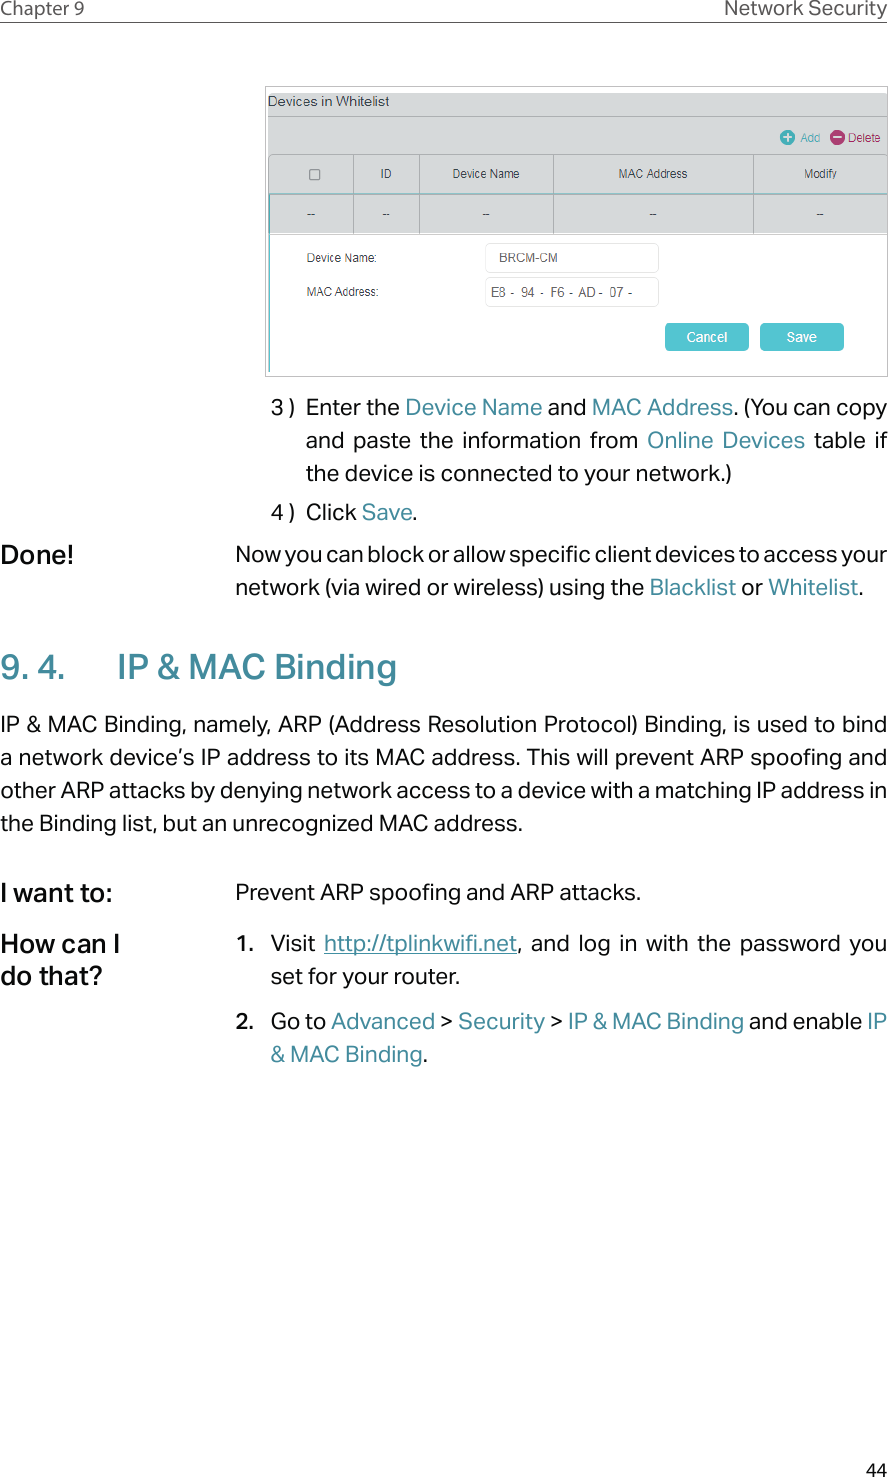 44Chapter 9 Network Security3 )  Enter the Device Name and MAC Address. (You can copy and paste the information from Online Devices table if the device is connected to your network.)4 )  Click Save.Now you can block or allow specific client devices to access your network (via wired or wireless) using the Blacklist or Whitelist.9. 4.  IP &amp; MAC BindingIP &amp; MAC Binding, namely, ARP (Address Resolution Protocol) Binding, is used to bind a network device’s IP address to its MAC address. This will prevent ARP spoofing and other ARP attacks by denying network access to a device with a matching IP address in the Binding list, but an unrecognized MAC address.Prevent ARP spoofing and ARP attacks.1.  Visit  http://tplinkwifi.net, and log in with the password you set for your router.2.  Go to Advanced &gt; Security &gt; IP &amp; MAC Binding and enable IP &amp; MAC Binding.Done!I want to:How can I do that?